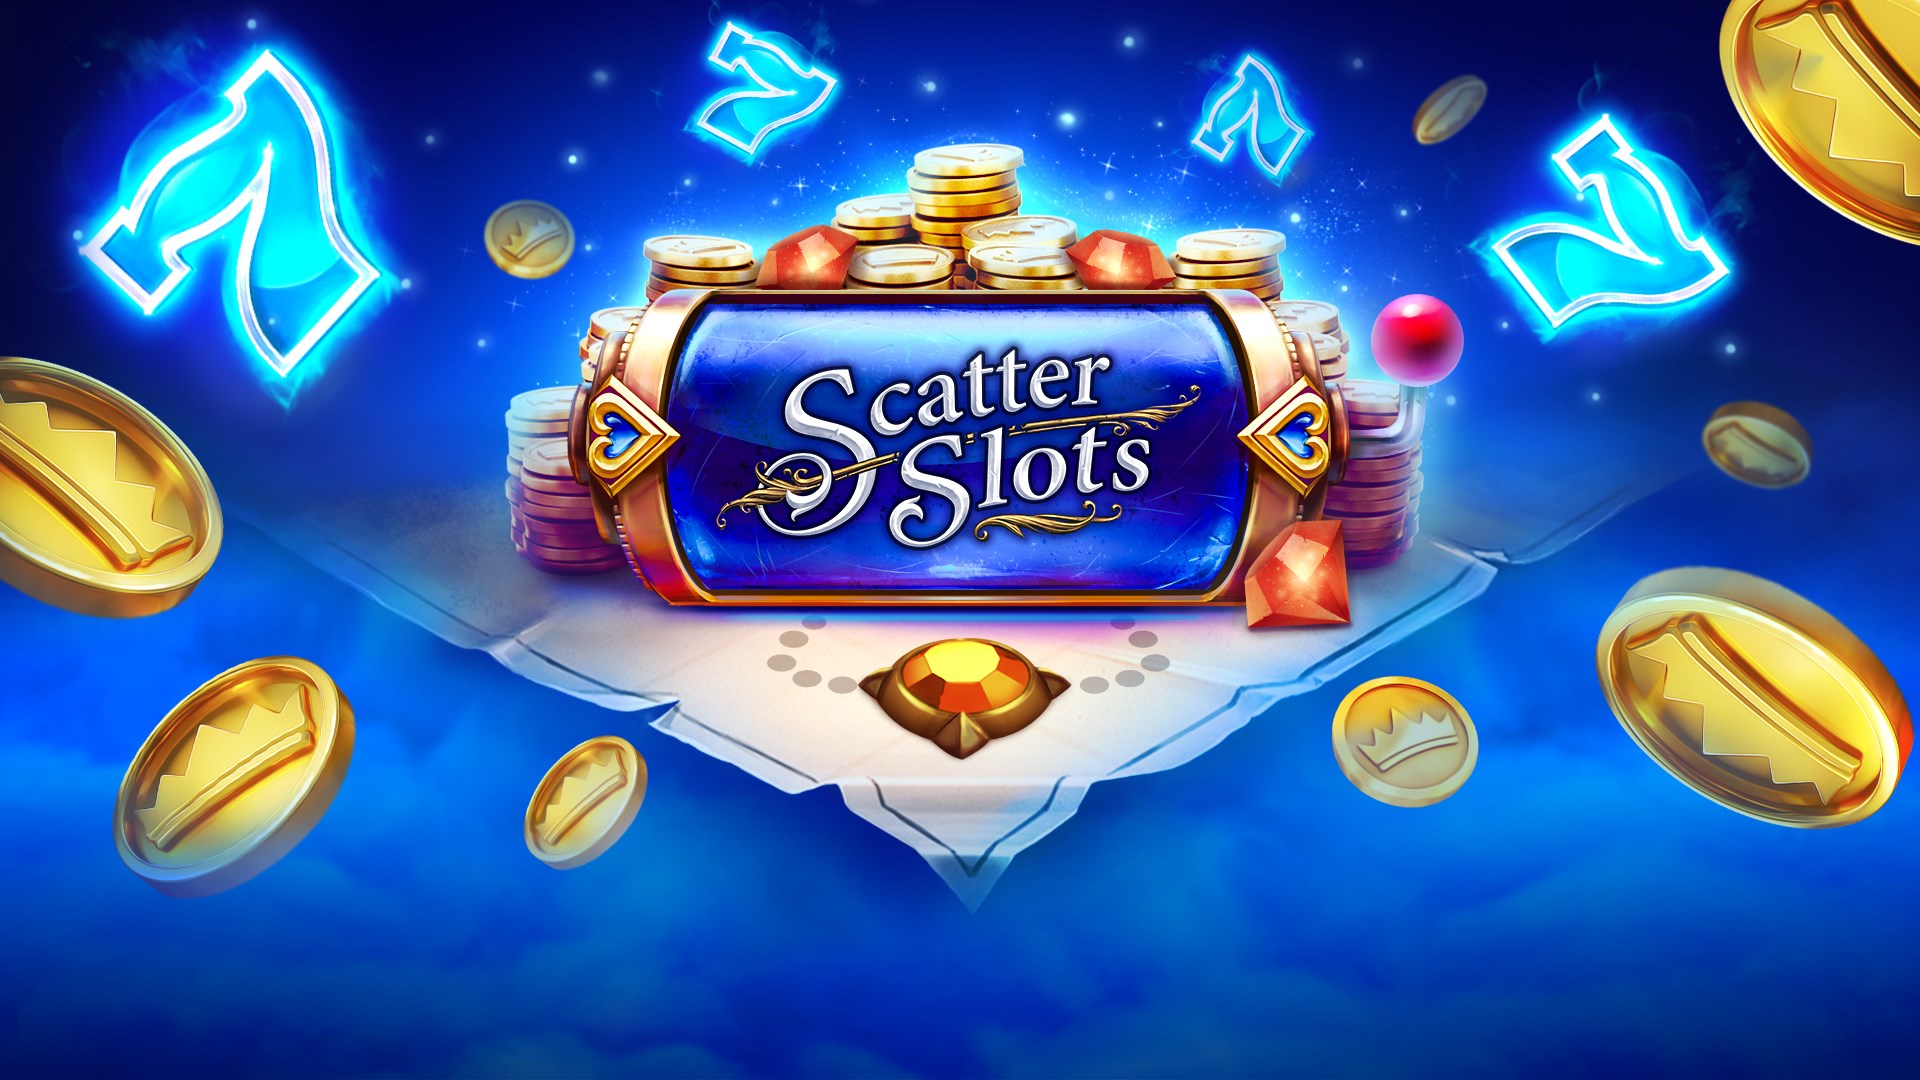 Free Slots No Downloads – How to Find the Top Rated Casino Slots Online